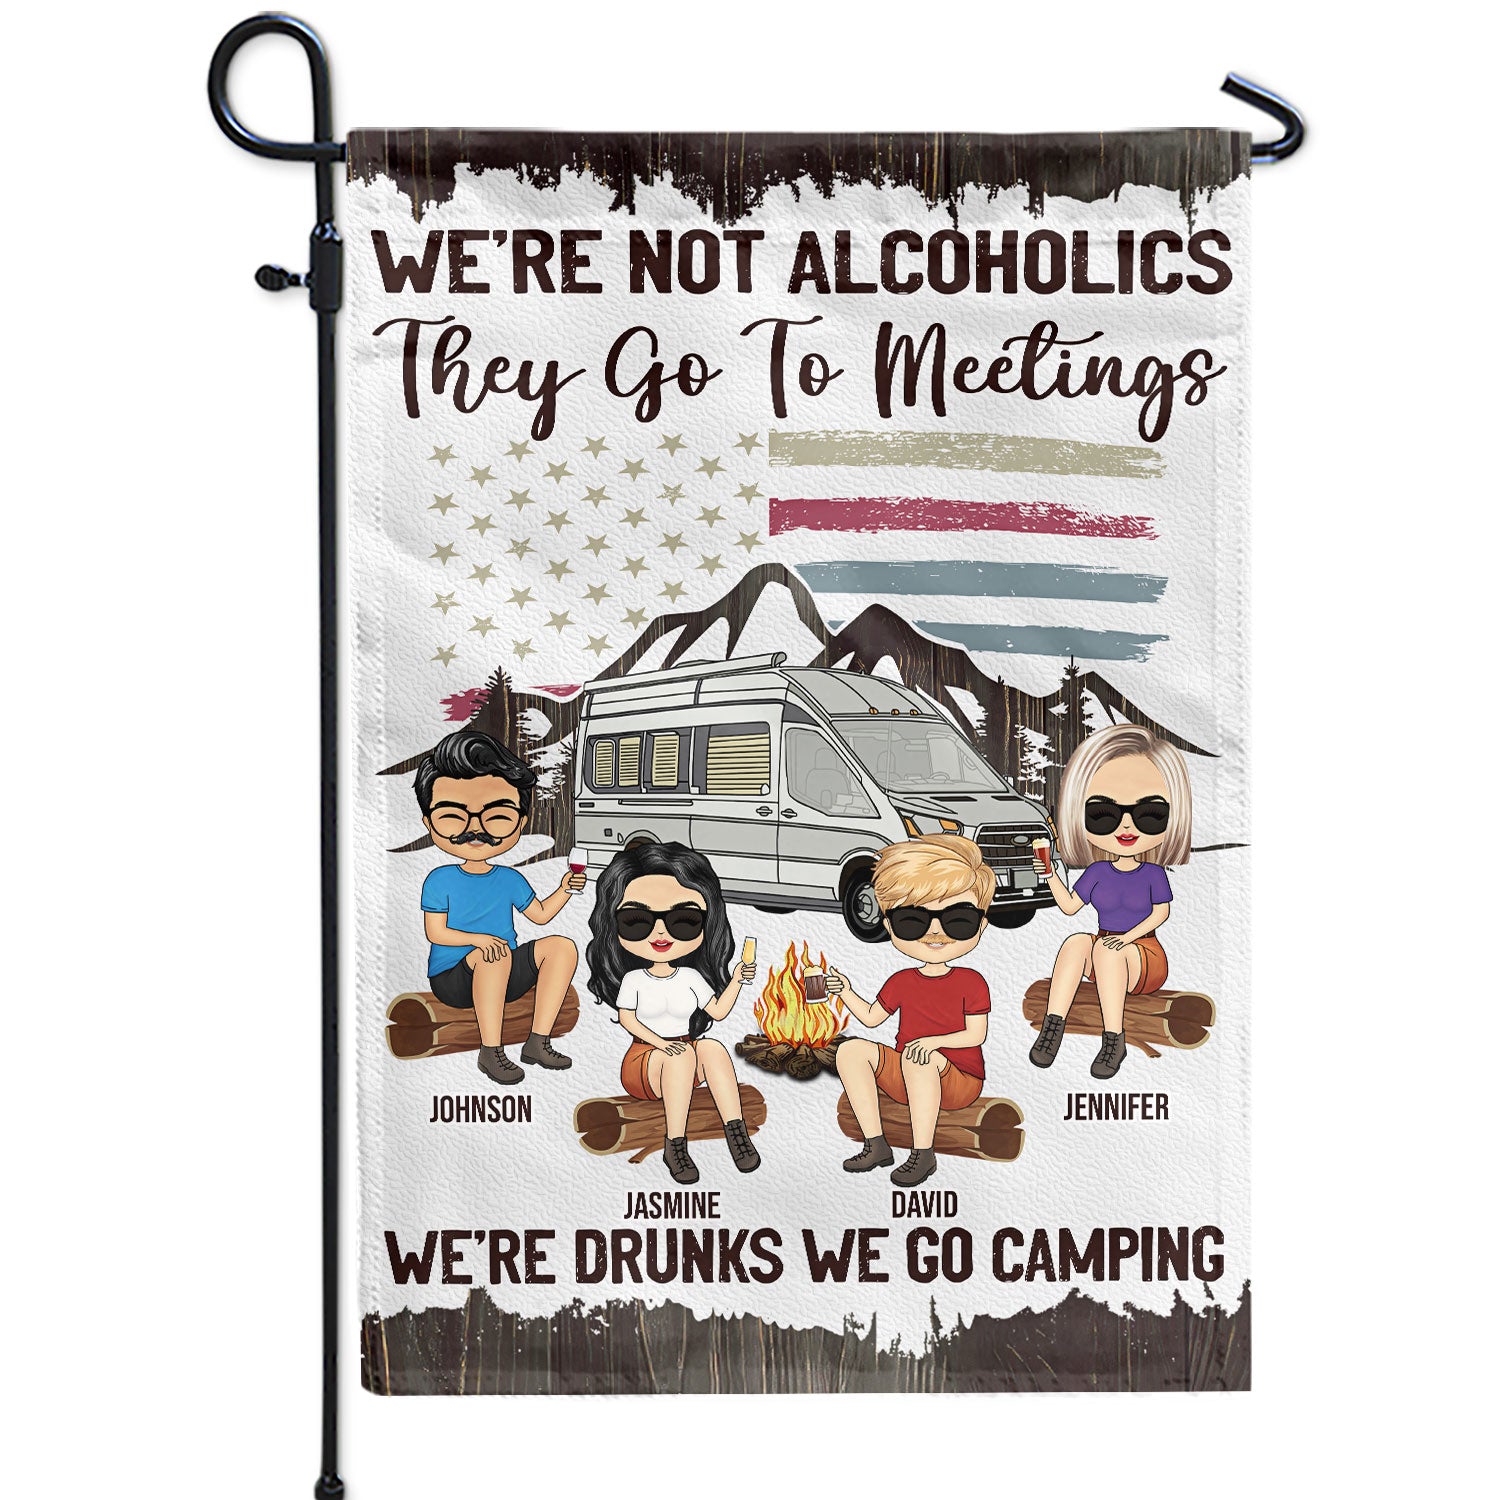 We're Drunks We Go Camping, Stars And Stripes - Campsite Decor Gift For Best Friends, Besties, Family, Campers - Personalized Custom Flag